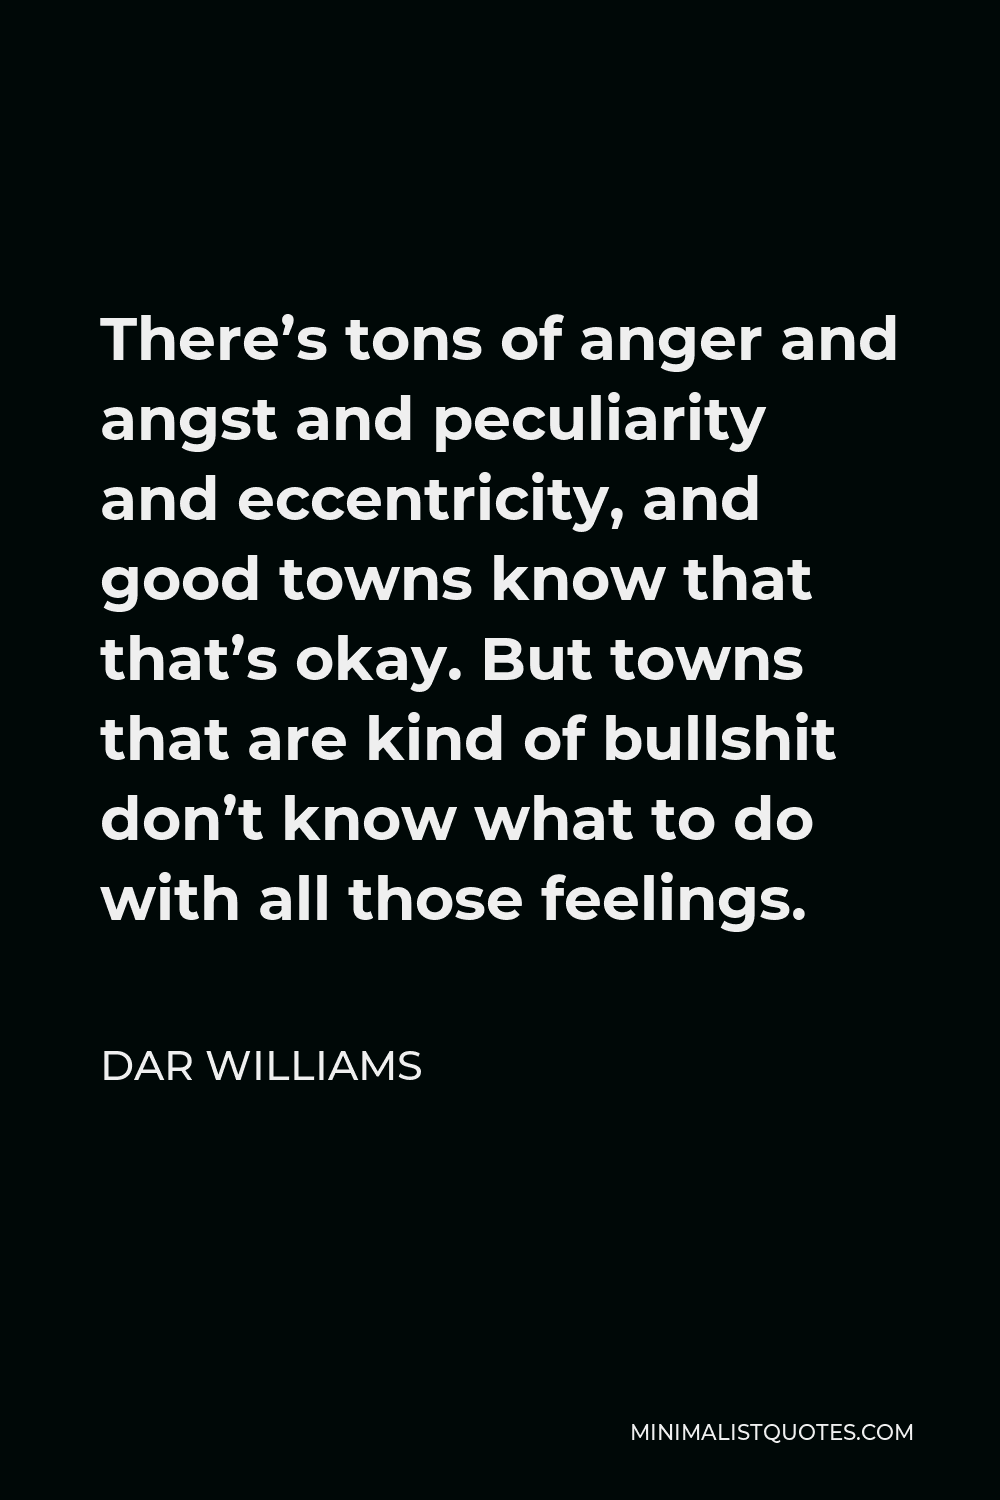 Dar Williams Quote - There’s tons of anger and angst and peculiarity and eccentricity, and good towns know that that’s okay. But towns that are kind of bullshit don’t know what to do with all those feelings.